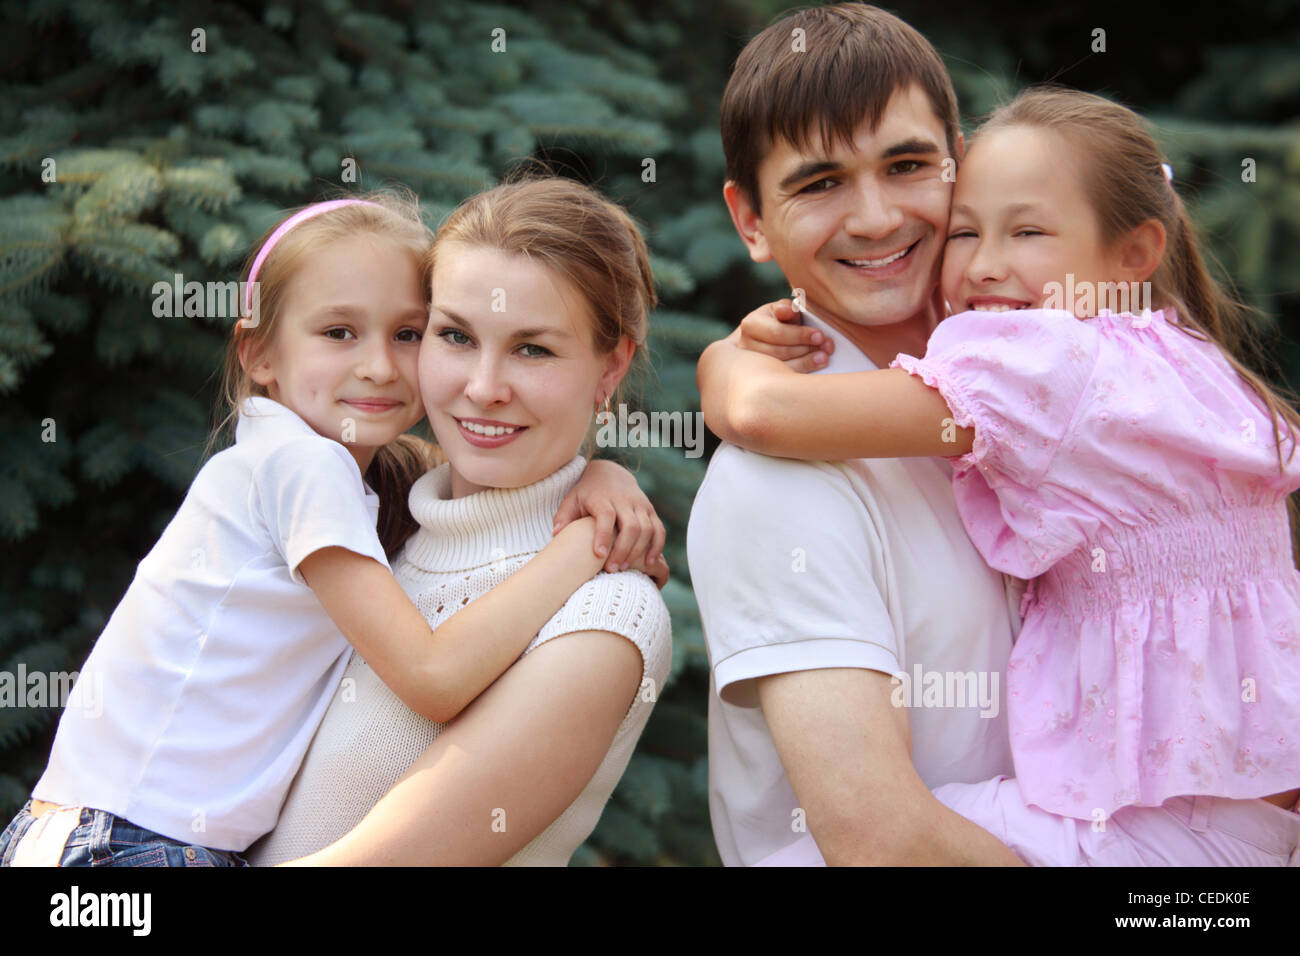 two parents hold children on hands on fir background Stock Photo